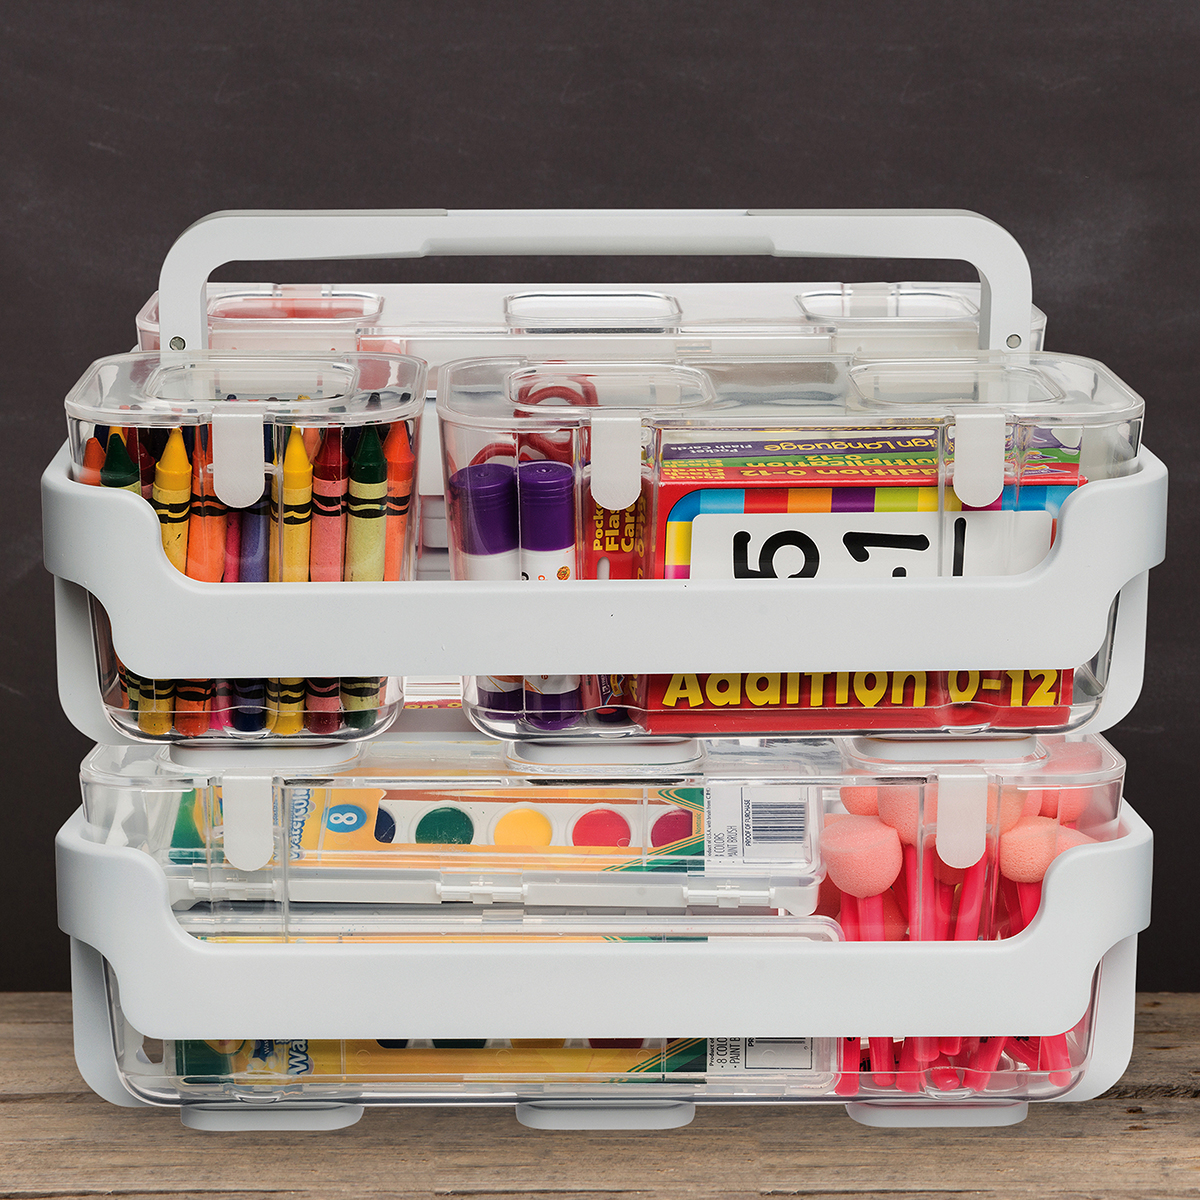 https://www.containerstore.com/catalogimages/392464/10080739-Deflecto-Caddy-Organizer-Fr.jpg